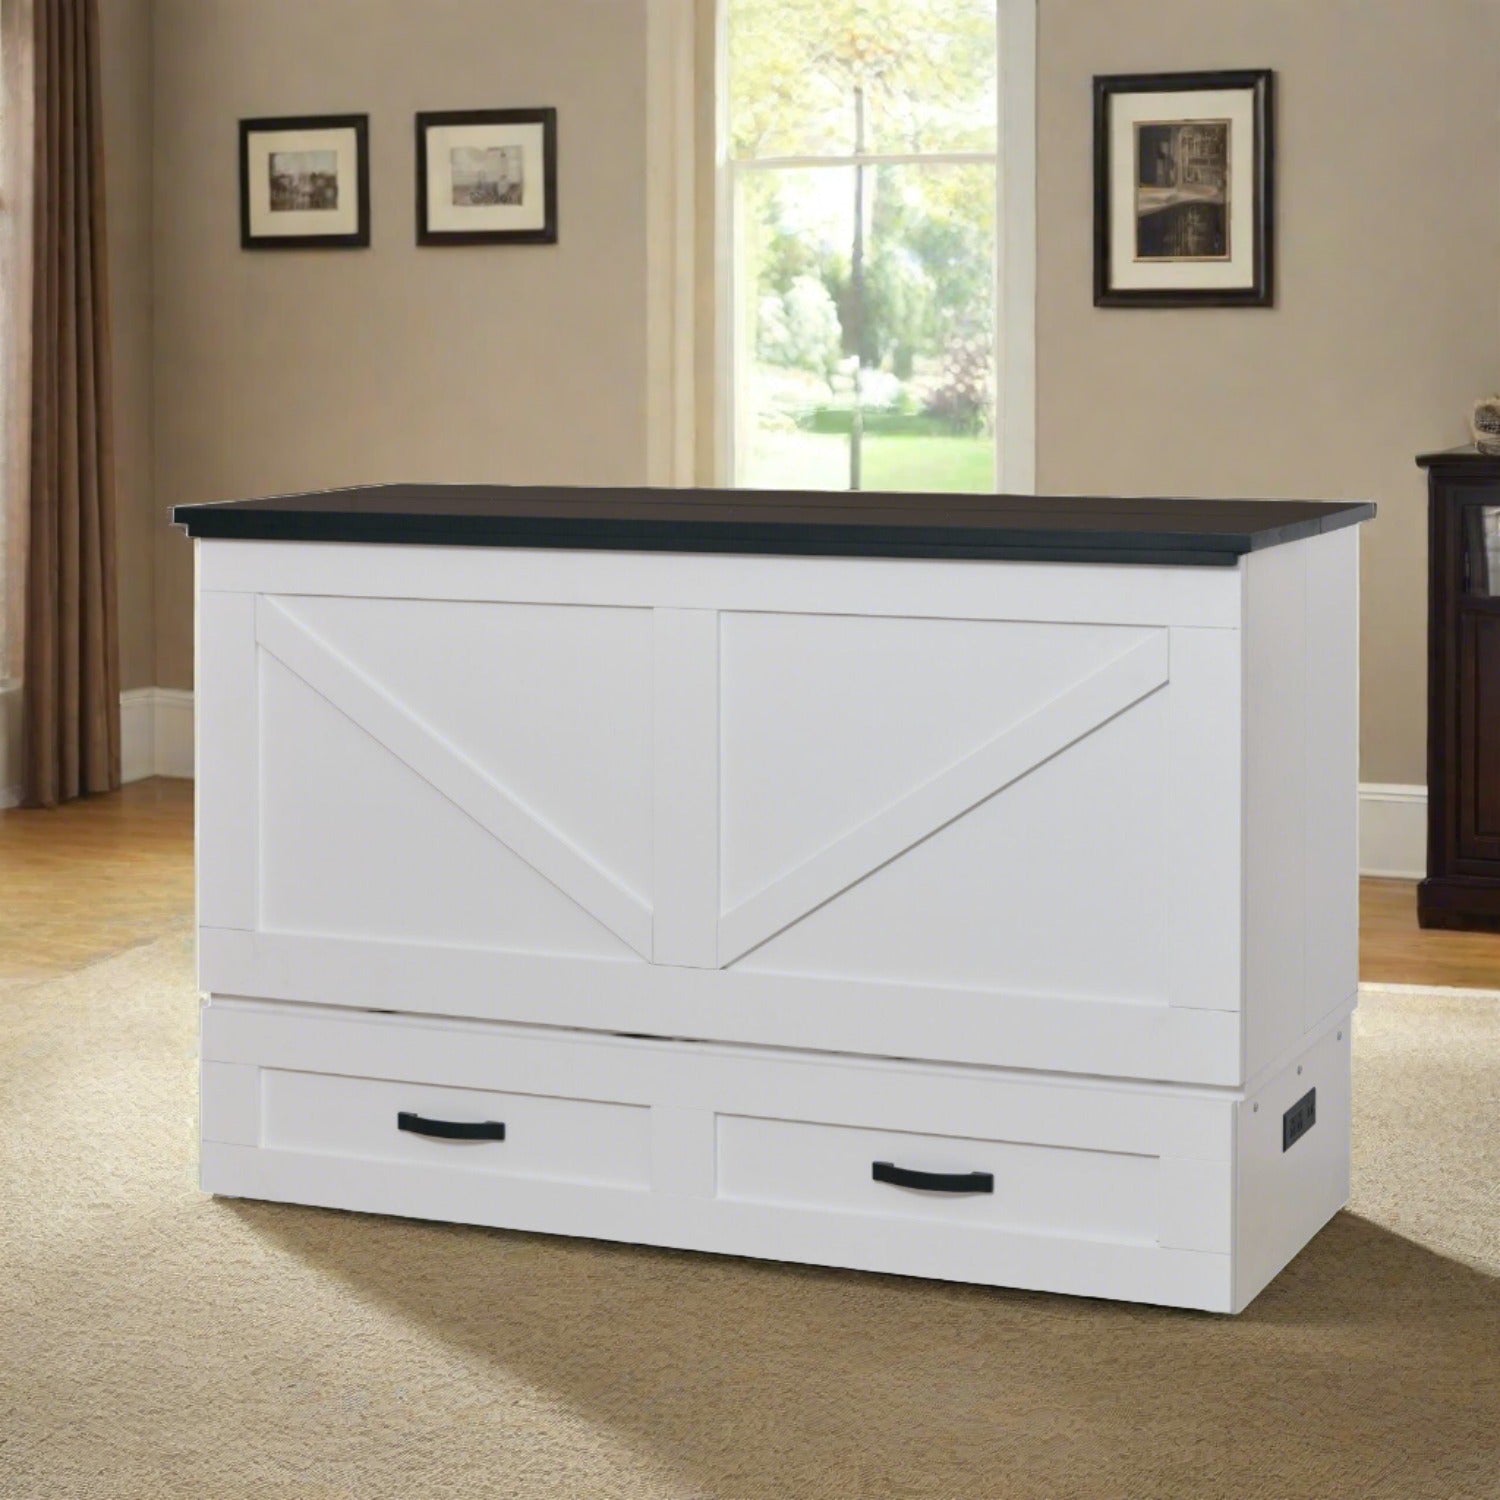 Cottage Cabinet Bed in Two Tone White/Black at Luxurious Beds and Linens.